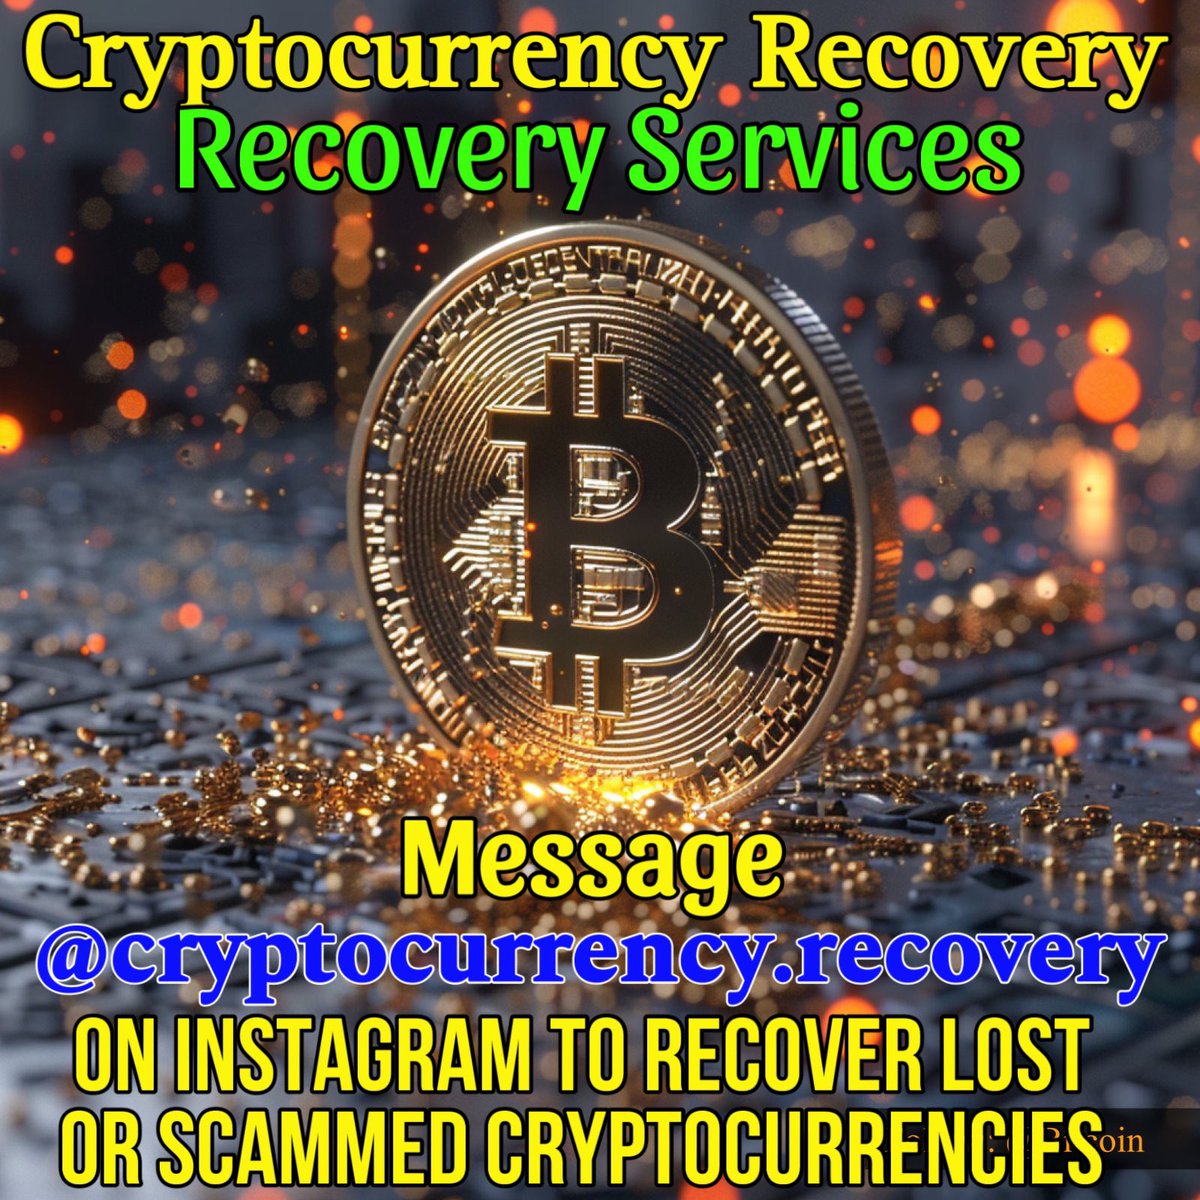 #cryptocurrency Recovery Services #bitcoin #USDT #btc #CryptoWallet #scammedbitcoin #cryptotrading #Blockchain #blockchainExperts #binance #bybit #Trustwallet #binary #investments #bitcoinmining #CryptoInvestor #CryptoCommunity #CryptoInvestment #usdtrecovery #RecoveryPhrase 💯✅